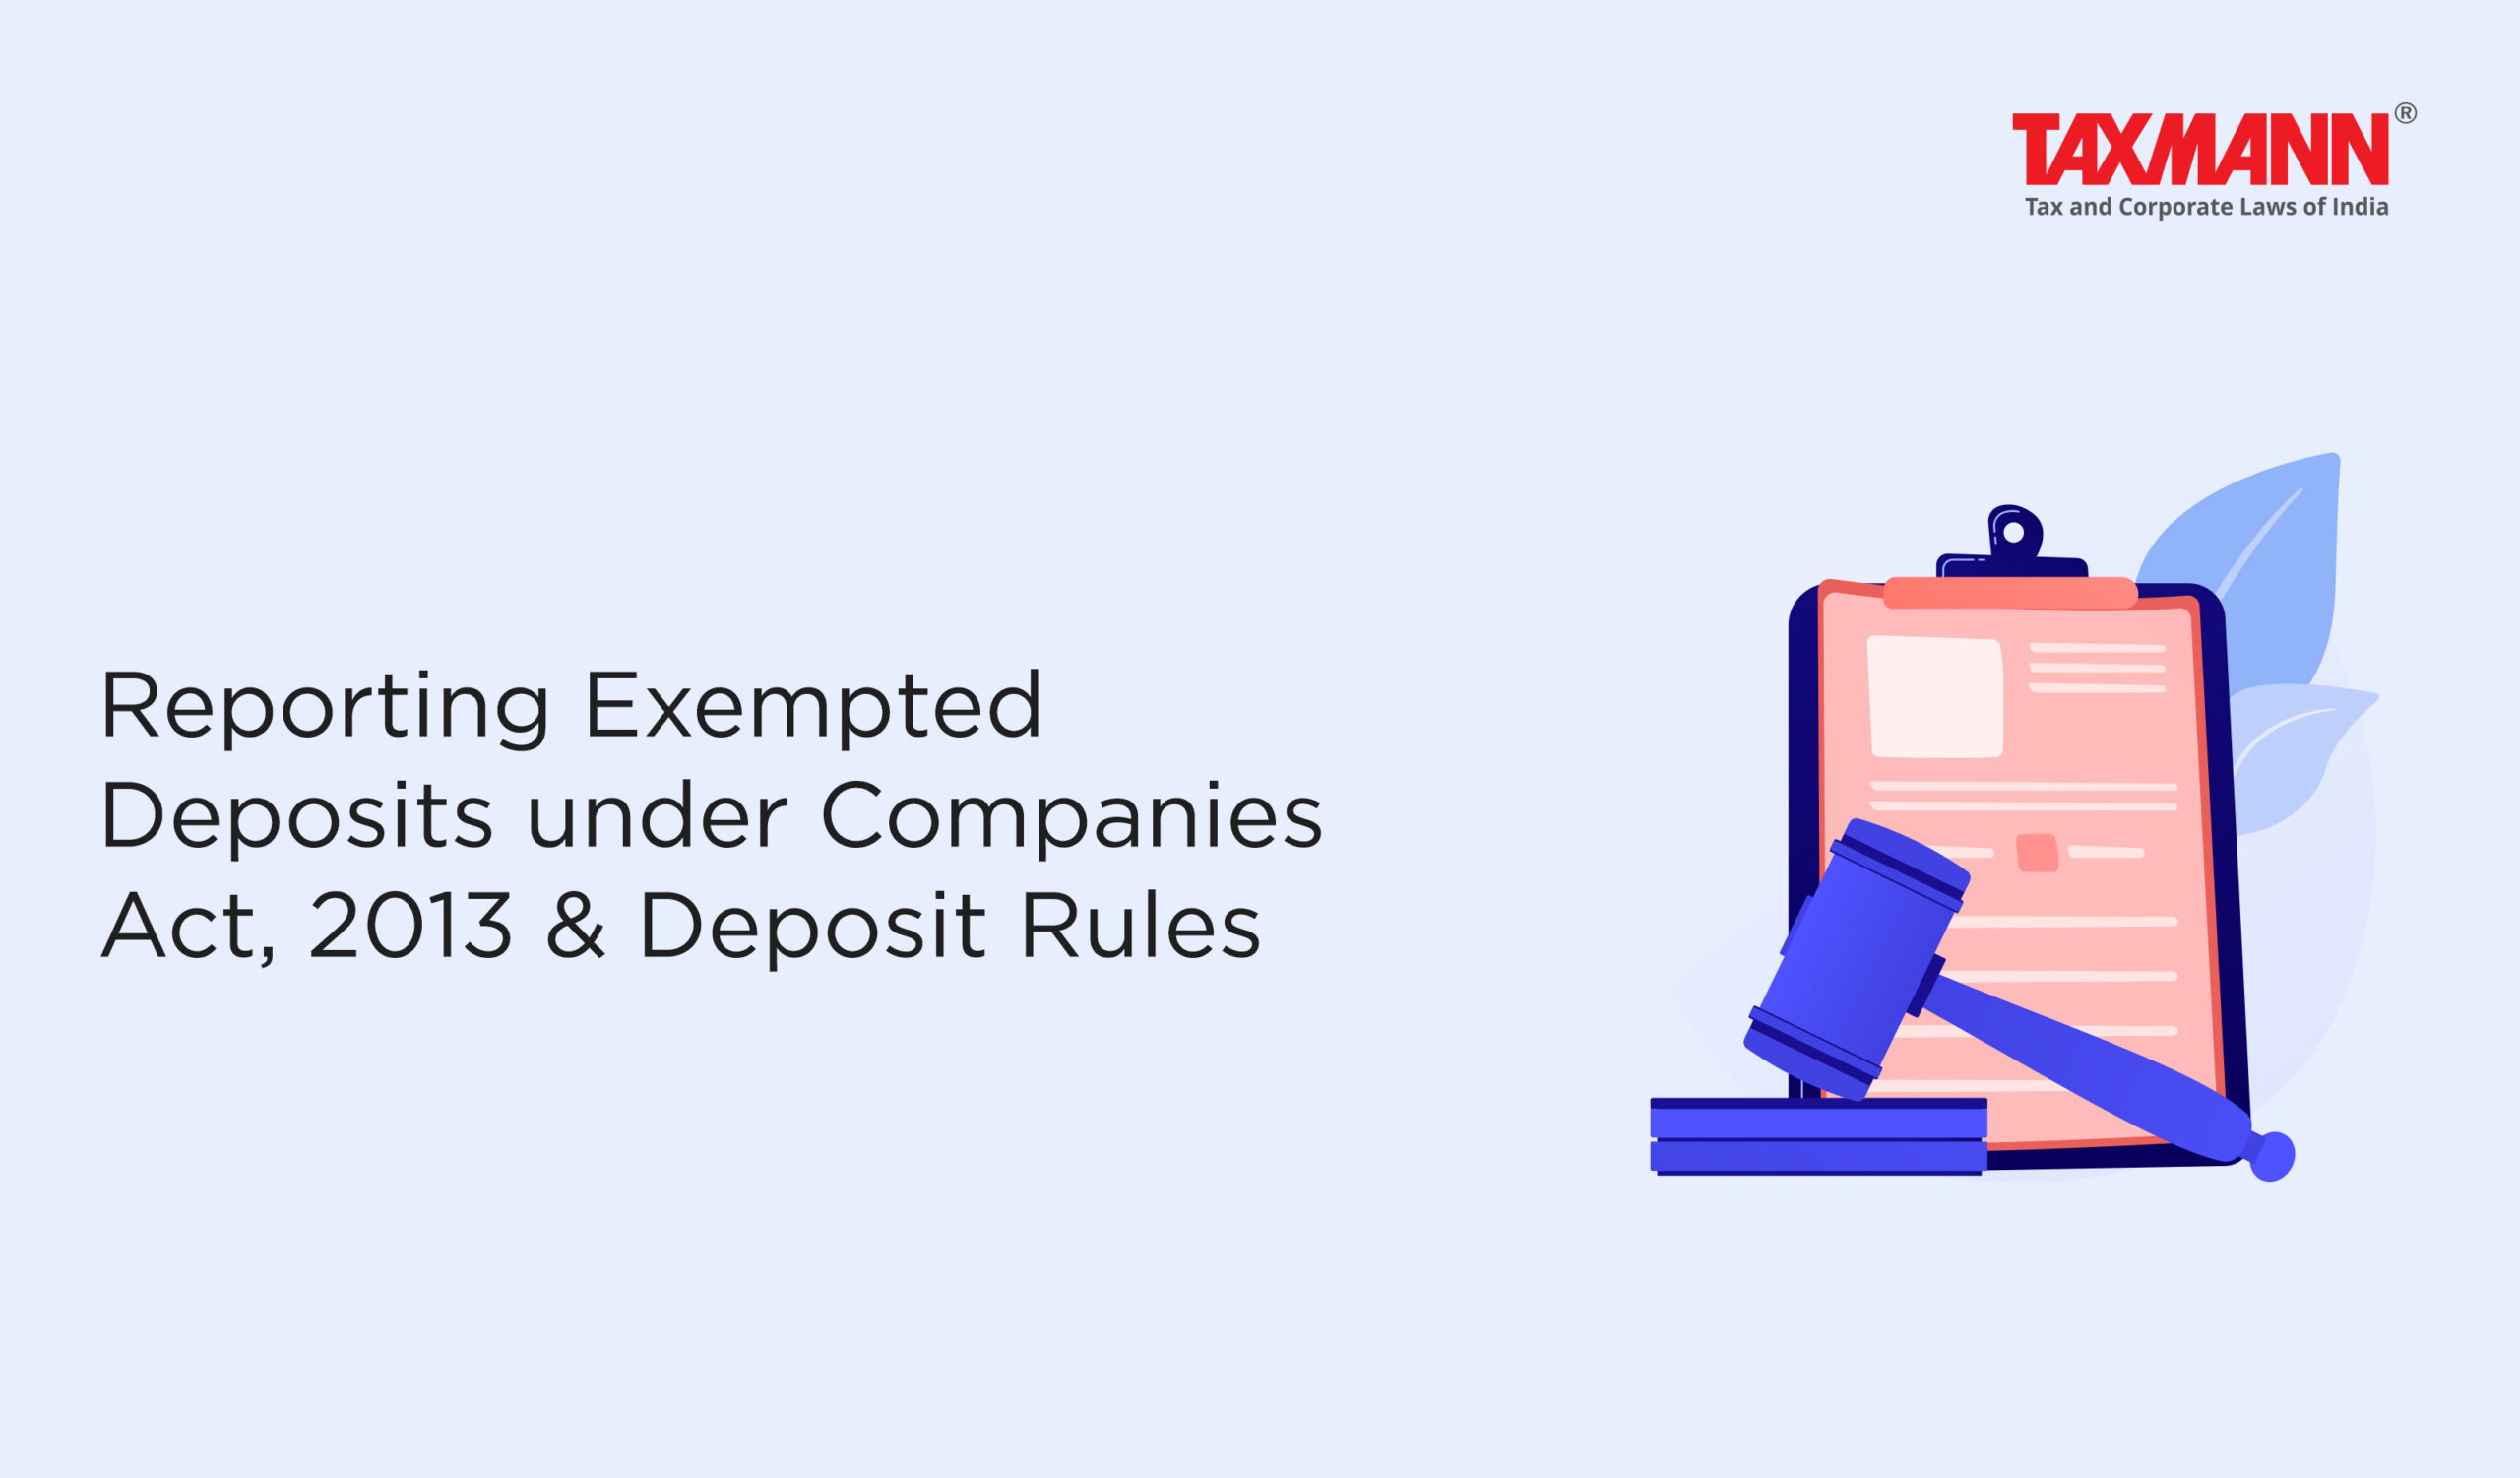 Deposit acceptance and reporting under the Companies Act